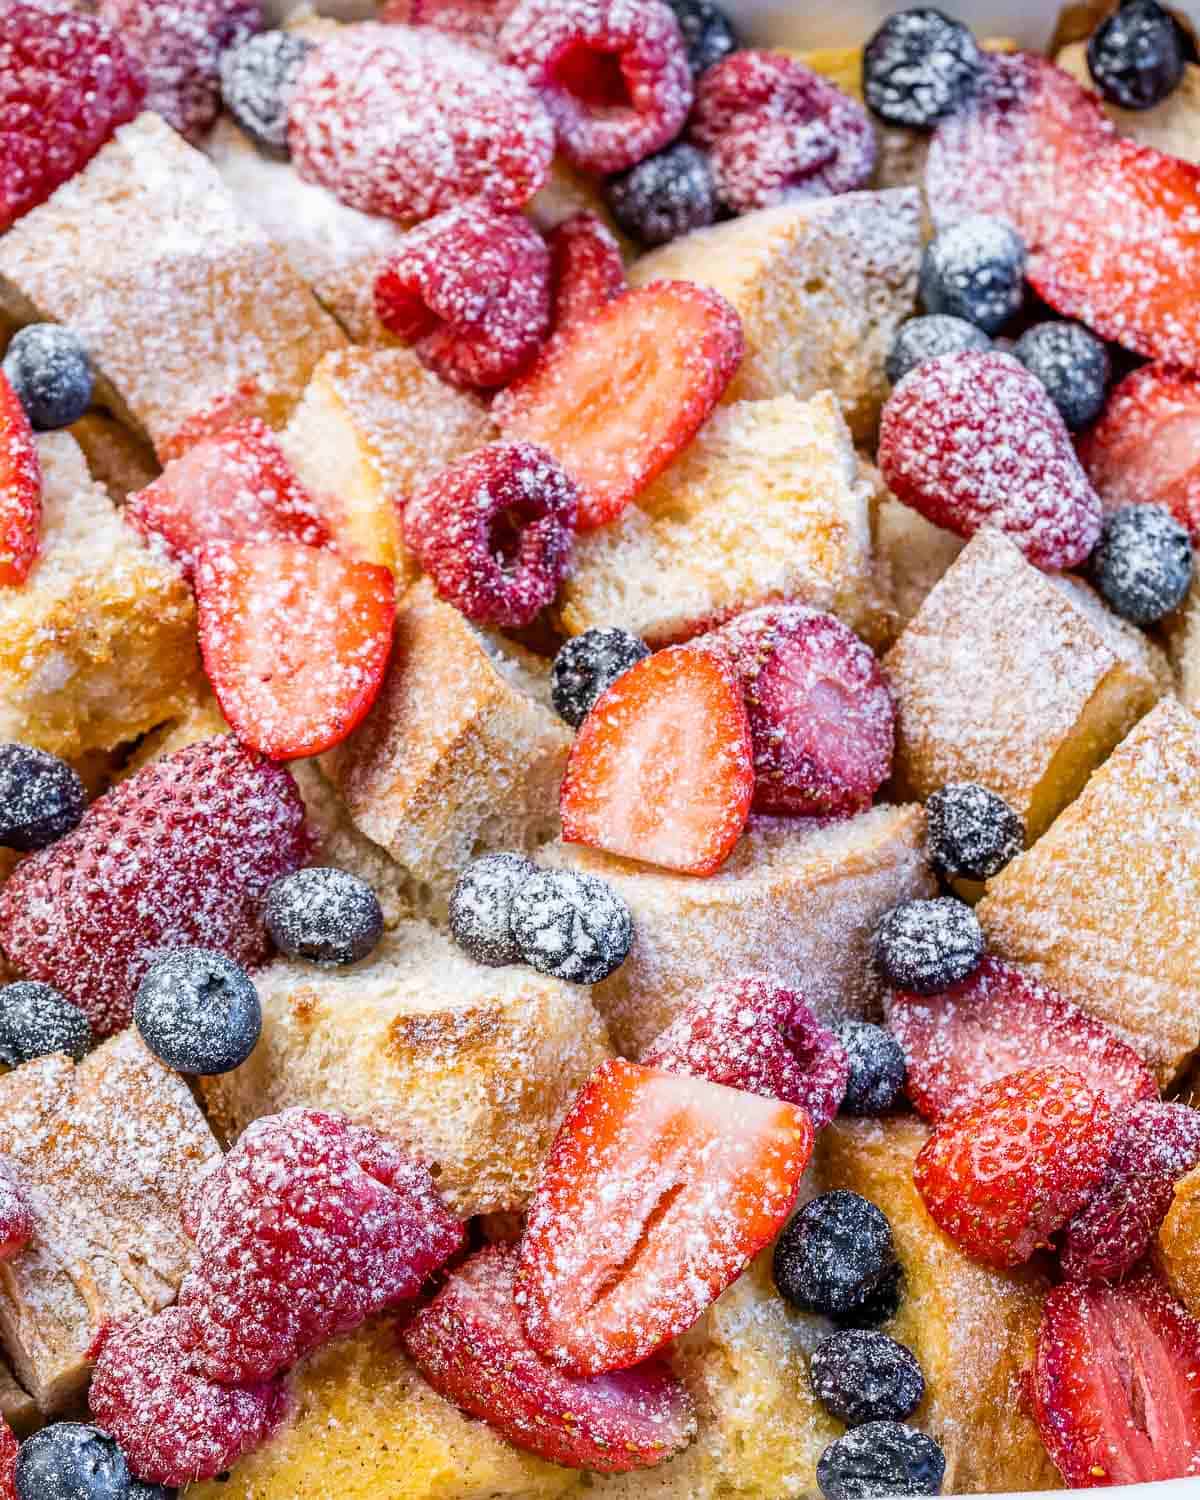 French toast casserole topped with strawberries, blueberries and raspberries.